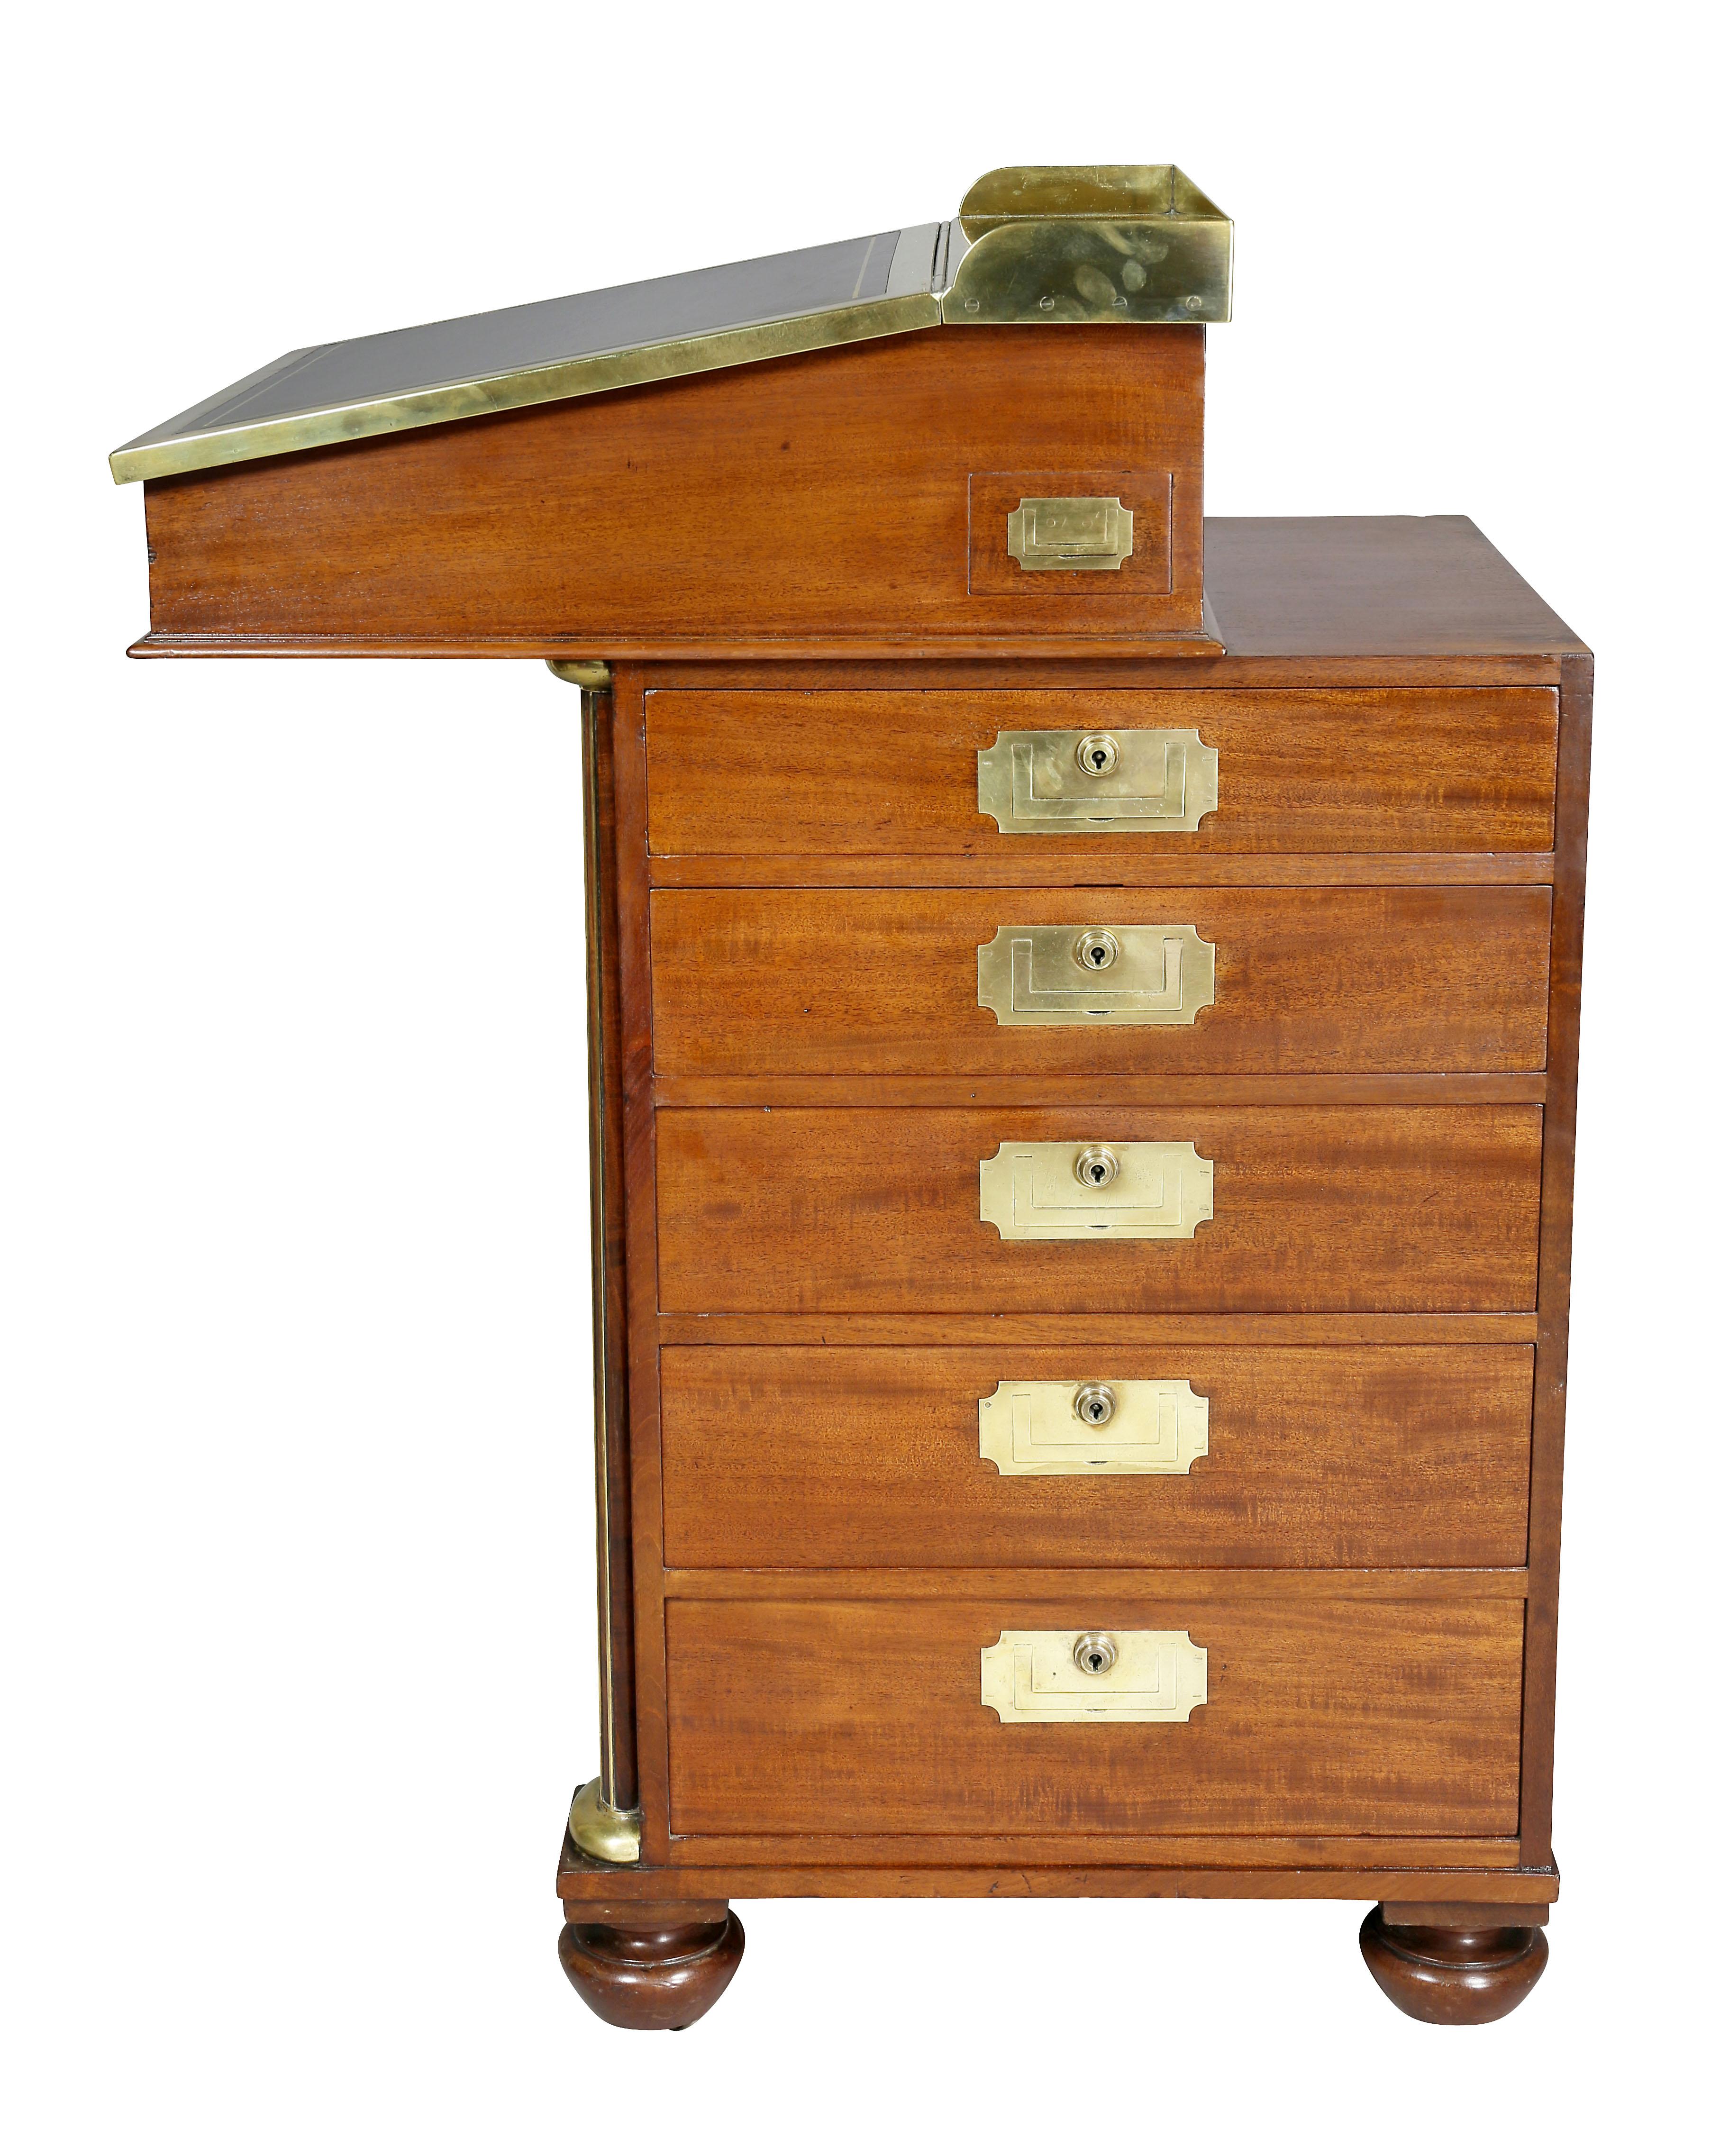 Regency Mahogany and Brass Mounted Campaign Desk 1